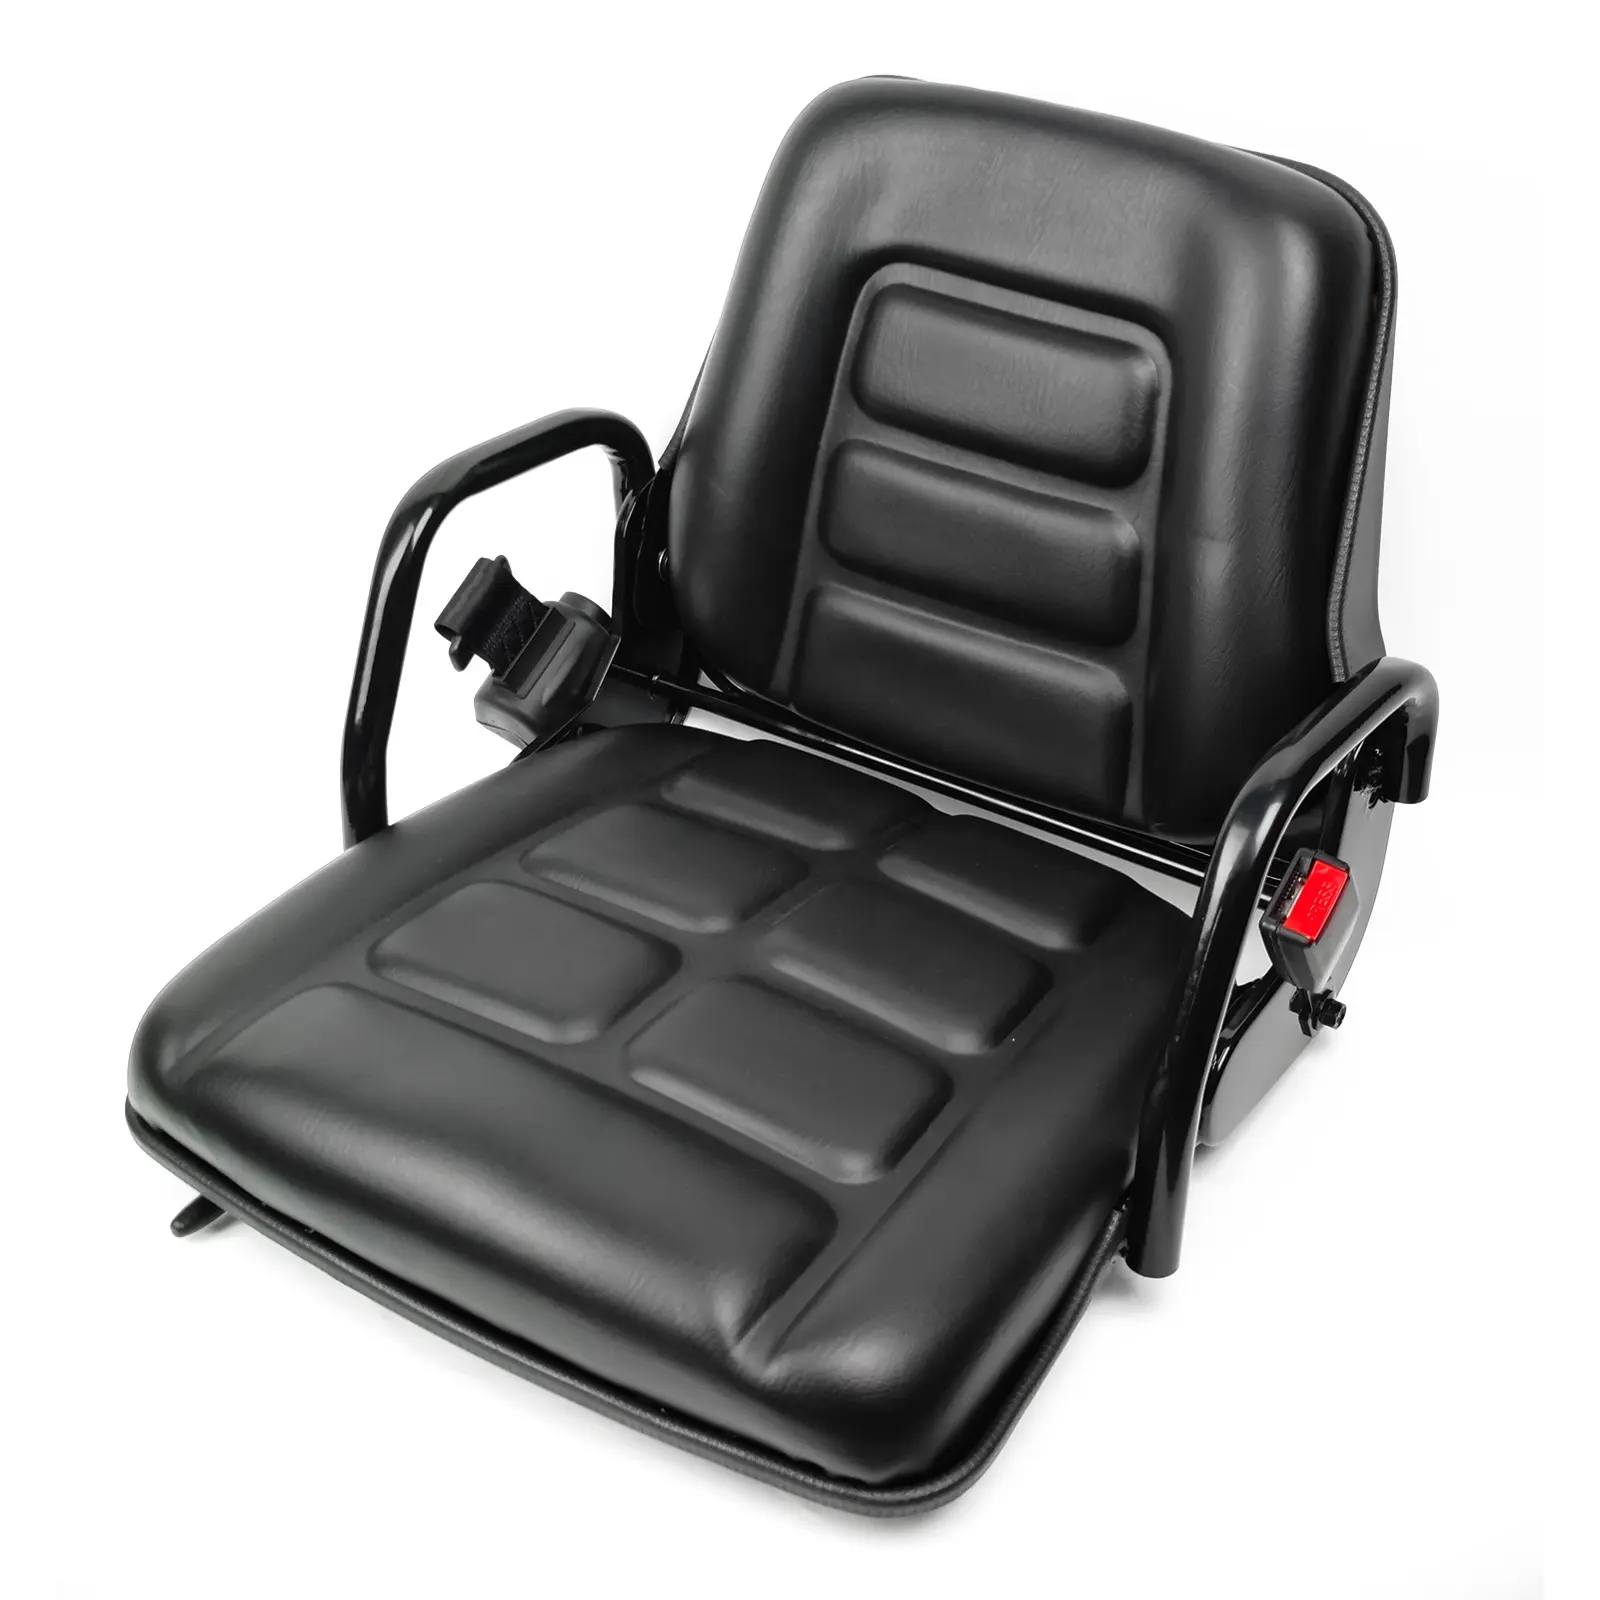 Aftermarket Universal Adjustable Forklift Seat with Safety Belt, Full Suspension Seat with foldable cushion